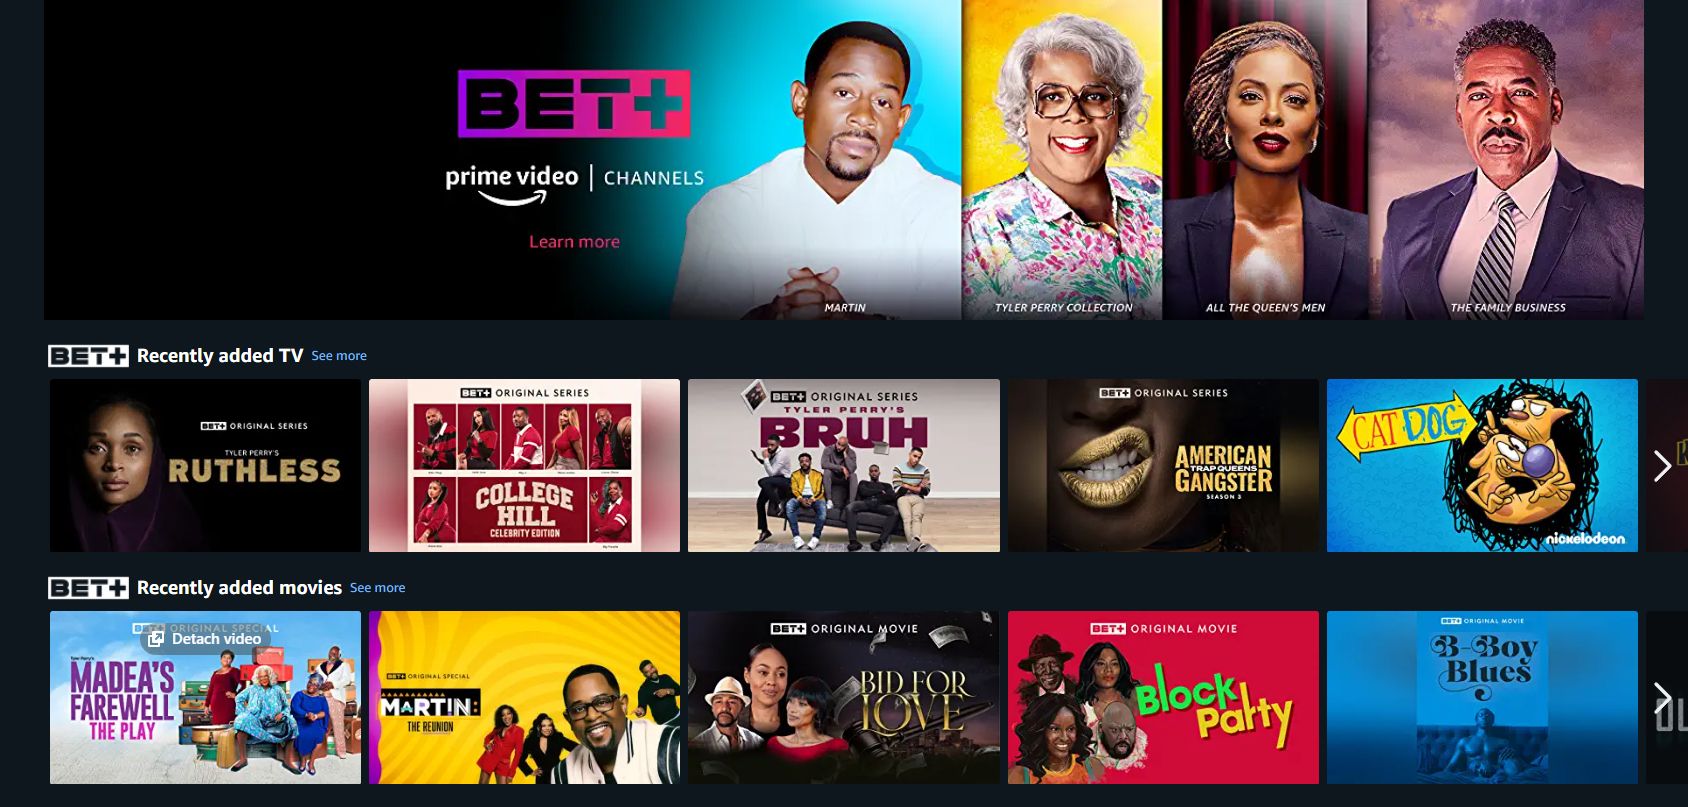 bet+ prime video channel